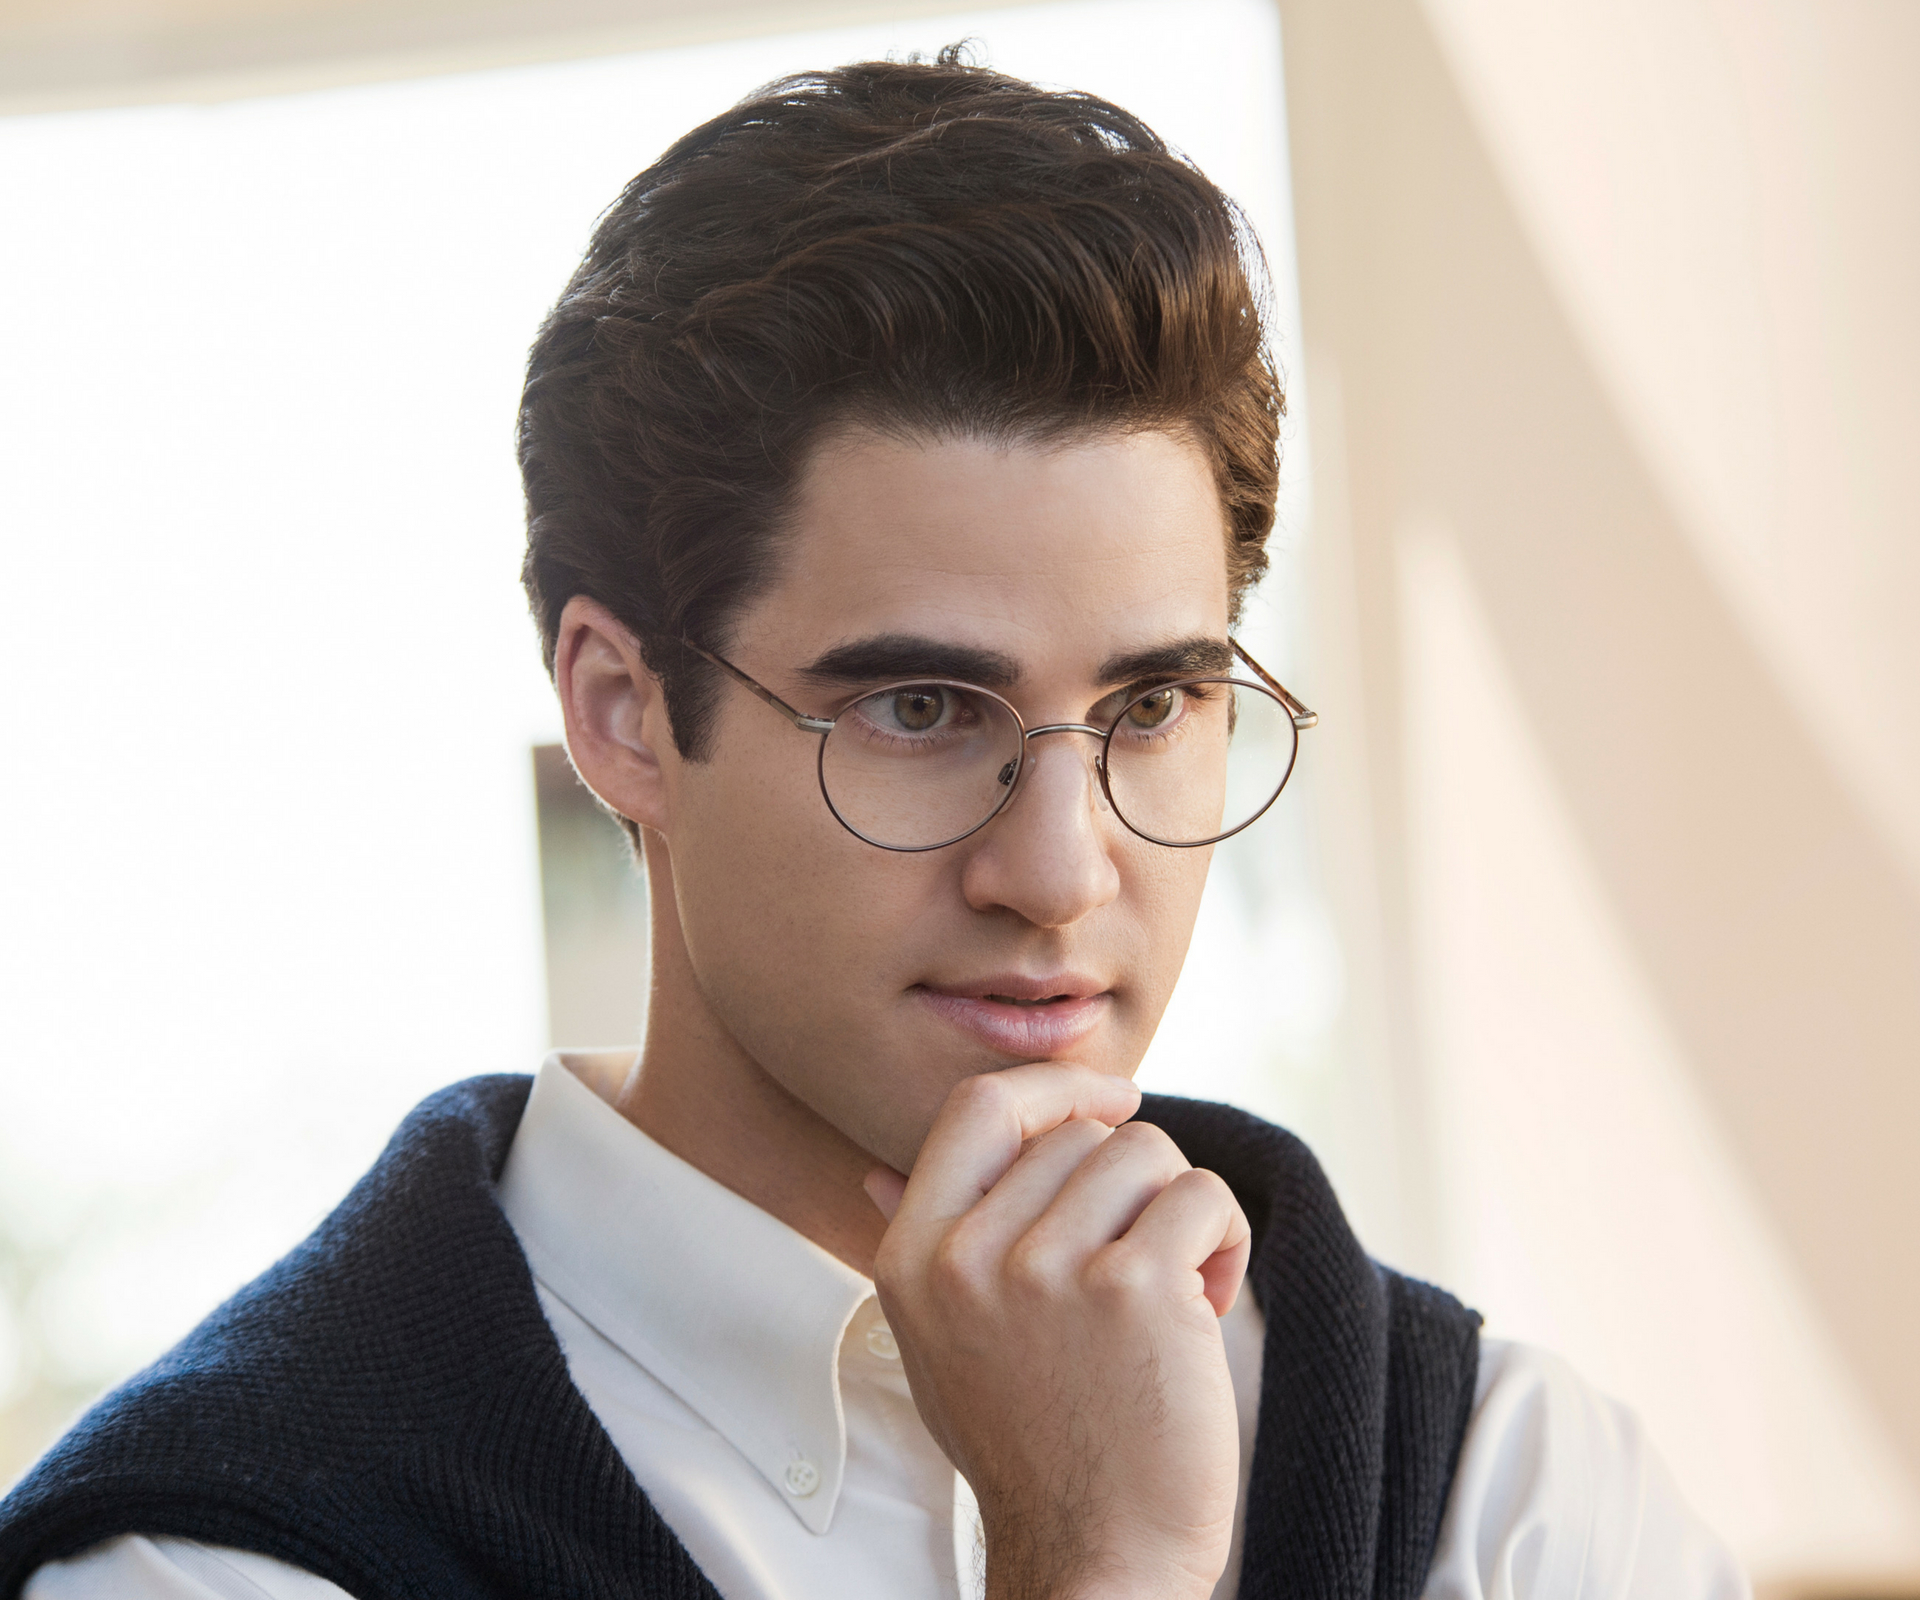 EXCLUSIVE: Darren Criss chats to OK! about his killer new role!